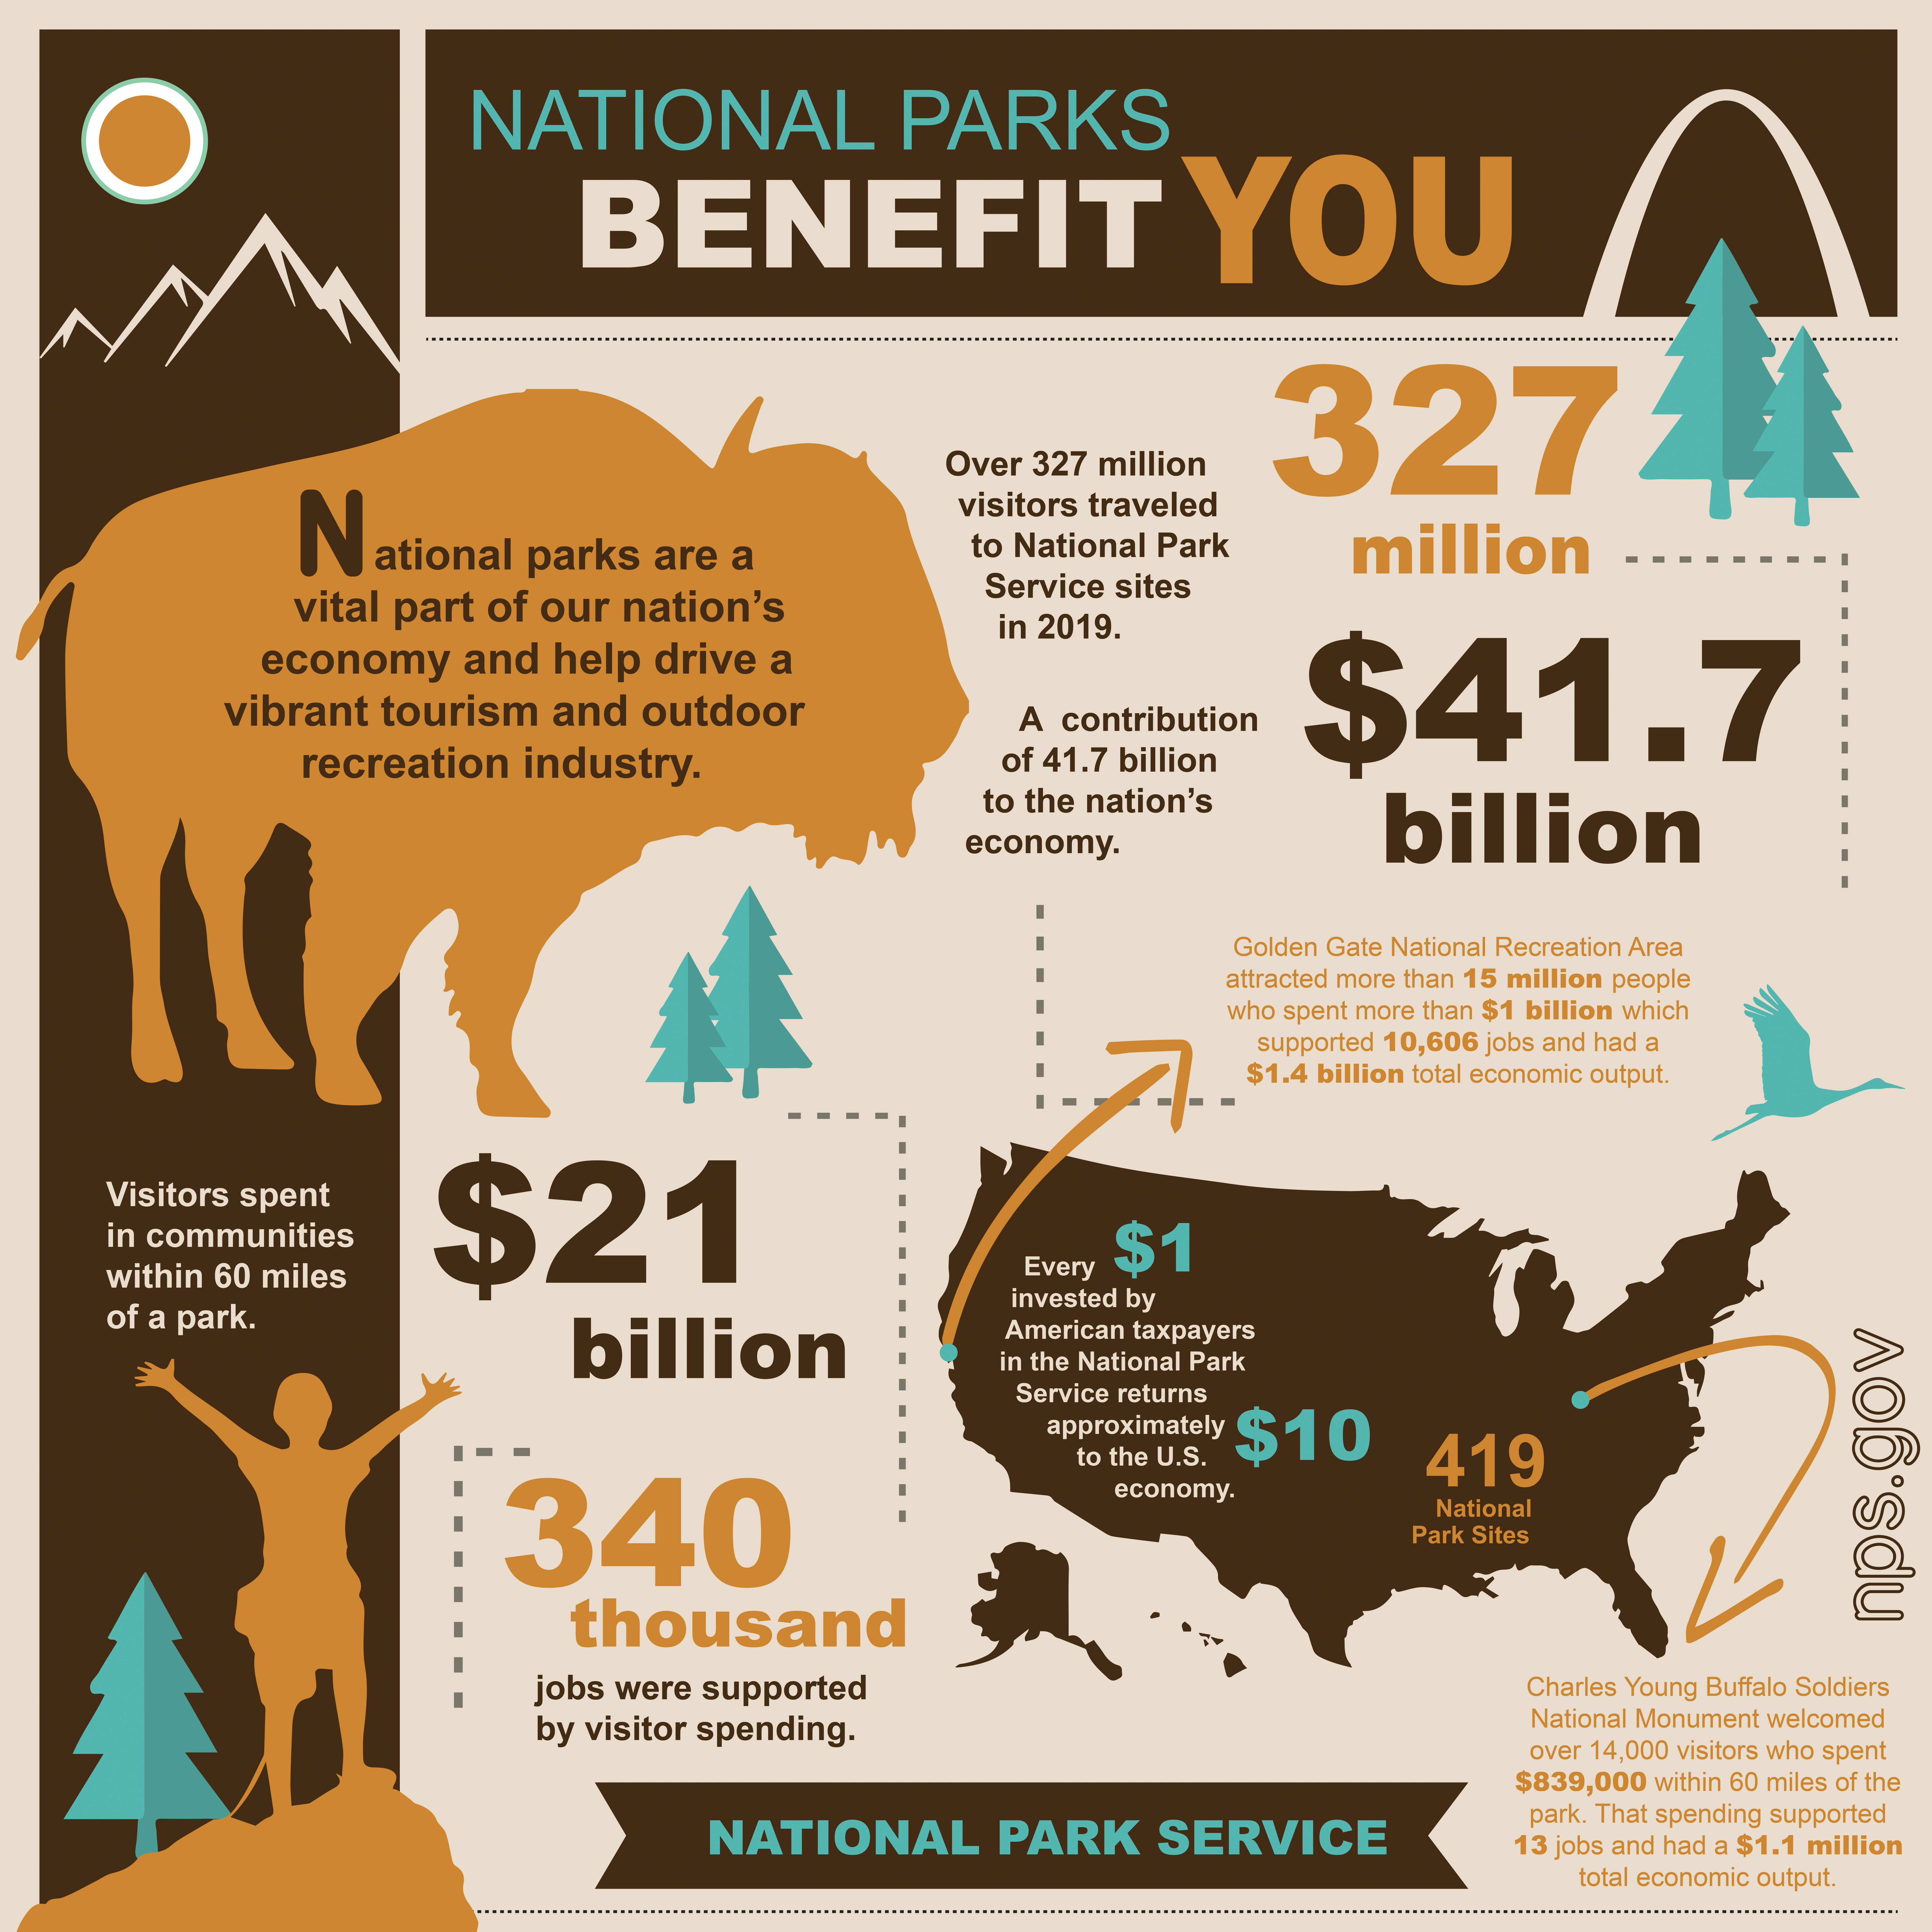 National Parks are a vital part of our nation’s economy and help drive a vibrant tourism and outdoor recreation industry. Visitors spent $21B in communities within 60 miles of a park. 340,000 jobs were supported by by visitor spending.